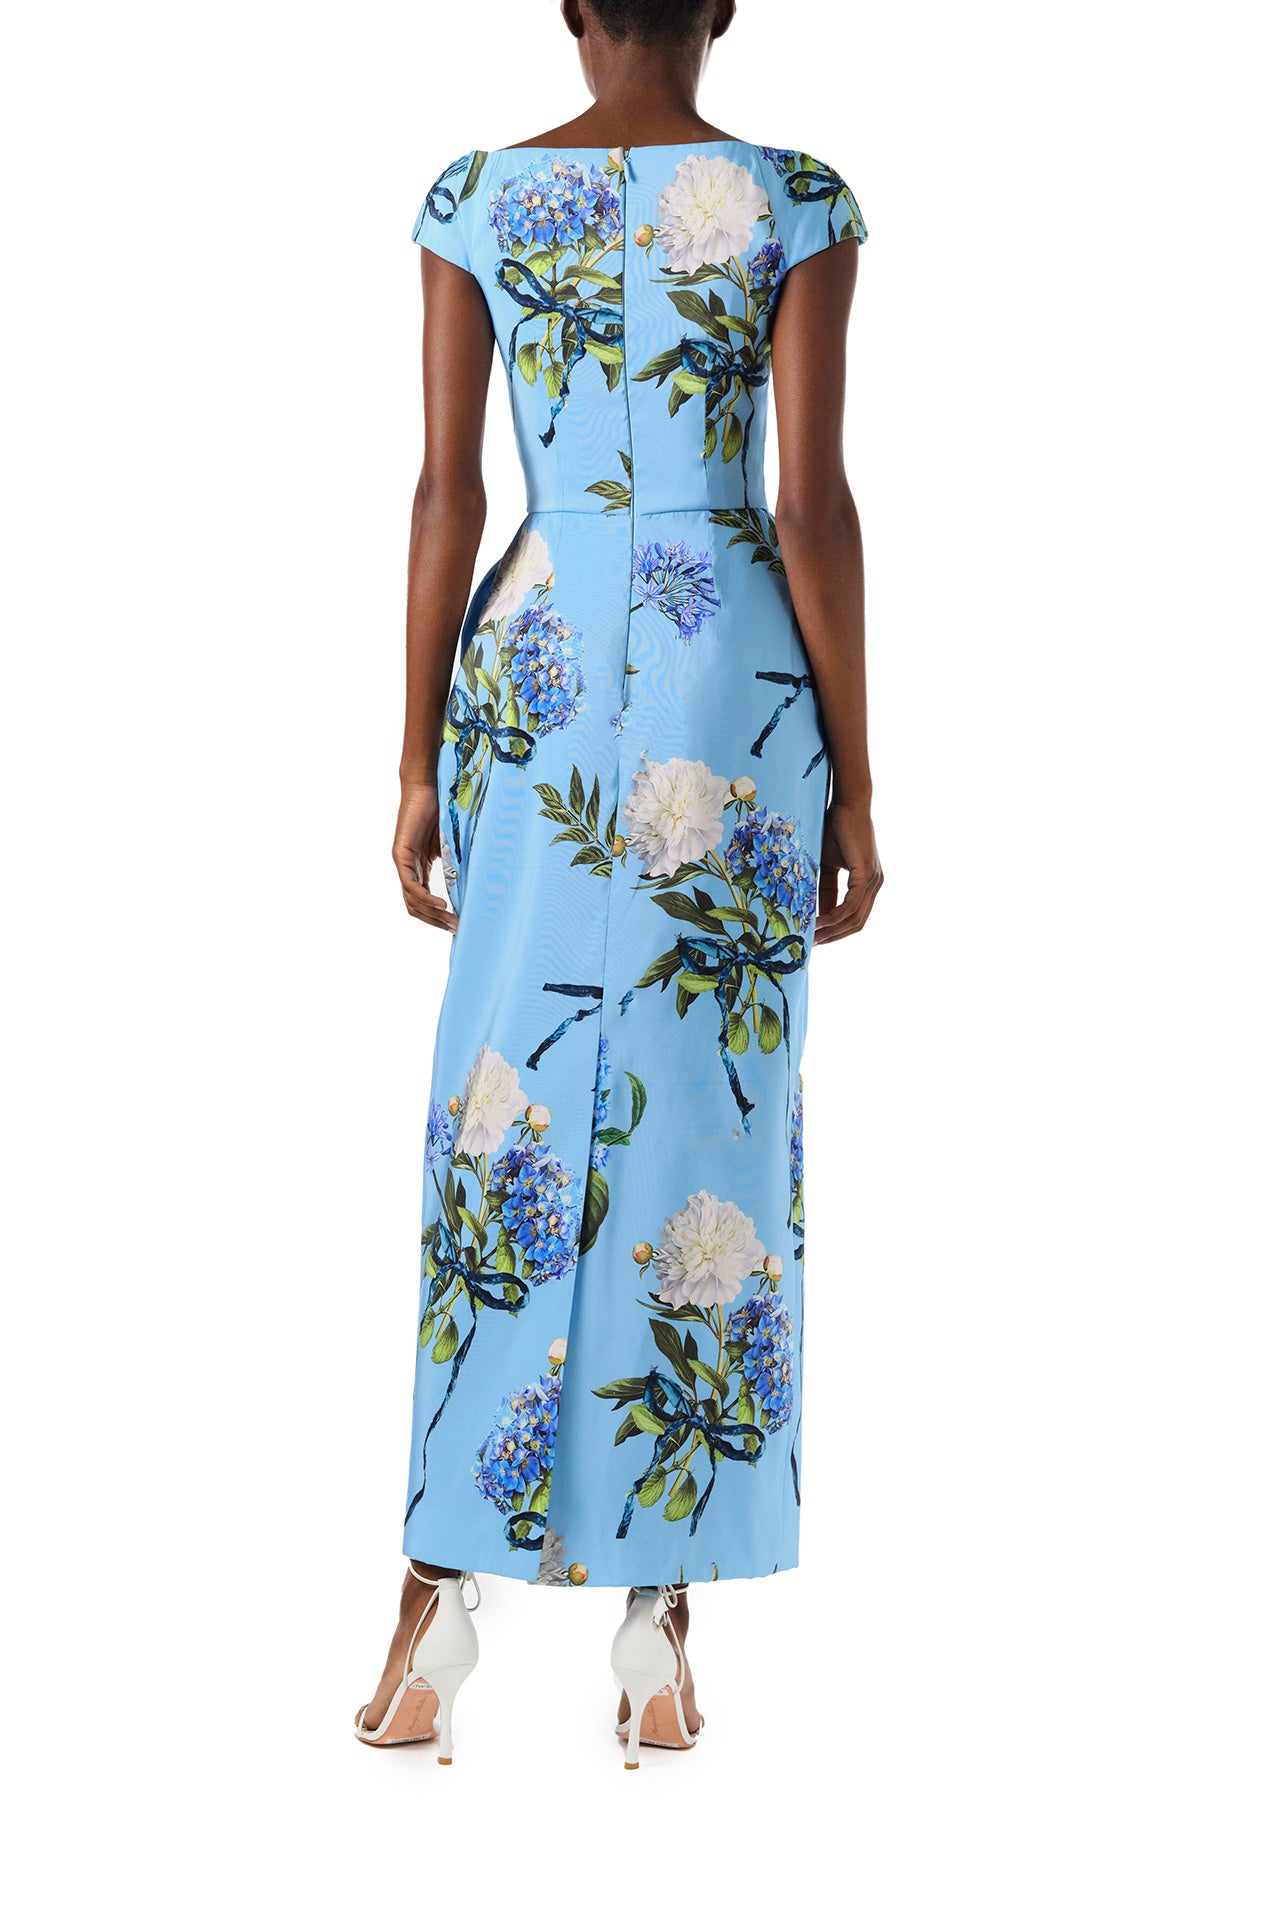 Monique Lhuillier Spring 2024 column gown with bateau neckline, cap sleeves and pockets in Sky Blue Hydrangea printed silk faille - back.